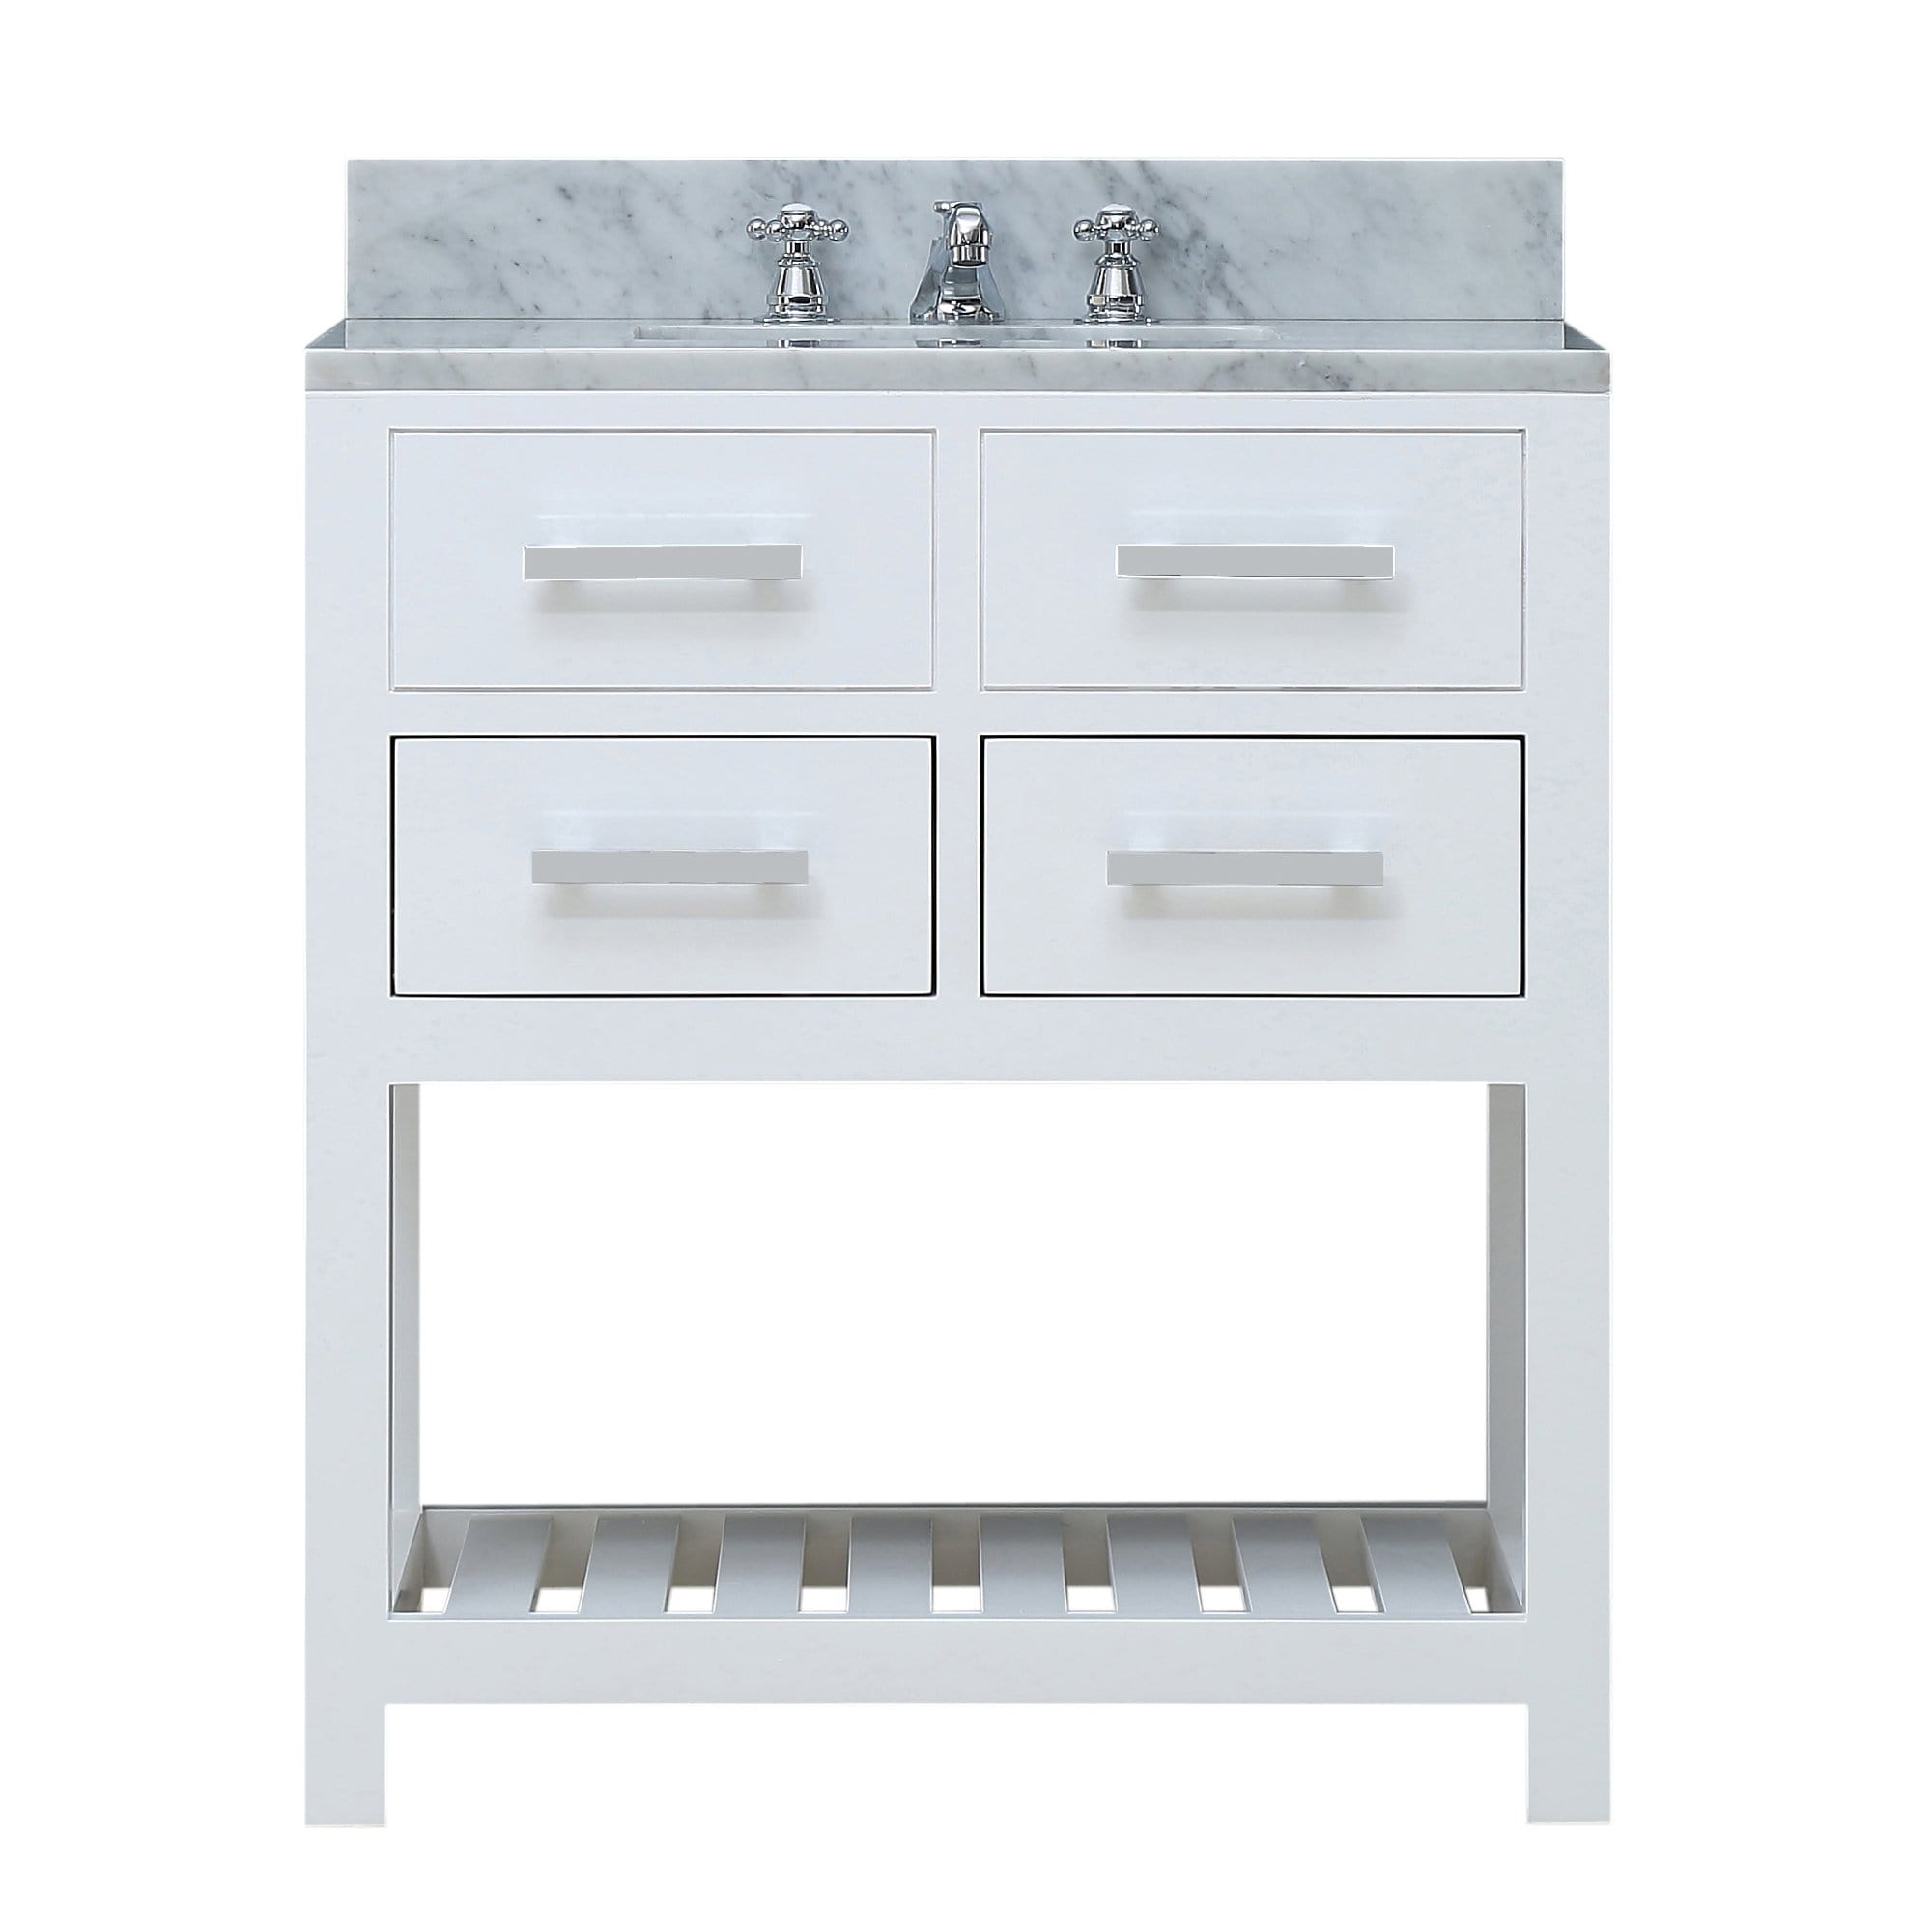 Water Creation 30 Inch Pure White Single Sink Bathroom Vanity With Faucet From The Madalyn Collection - Molaix700621683575Bathroom vanityMA30CW01PW-000BX0901